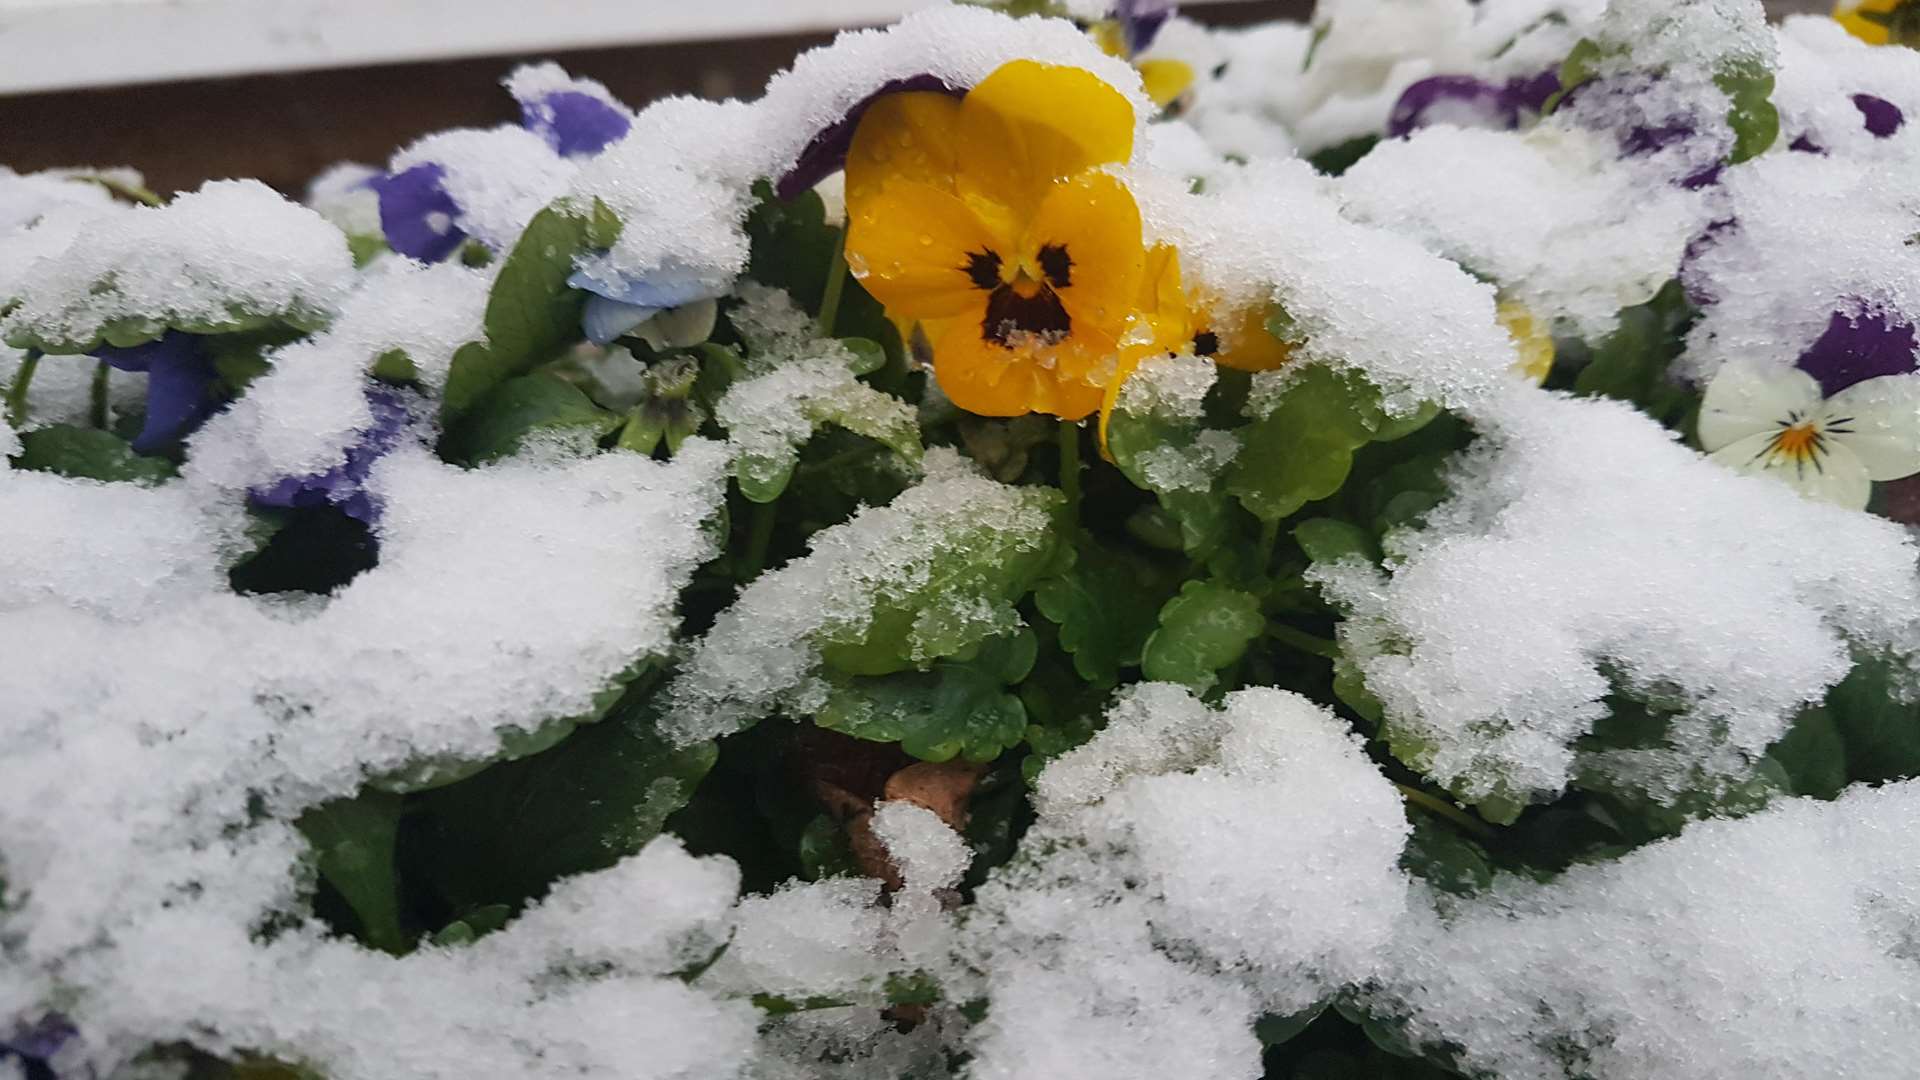 A winter pansy peeping through the snow in Whitstable. Pic Jo Clark